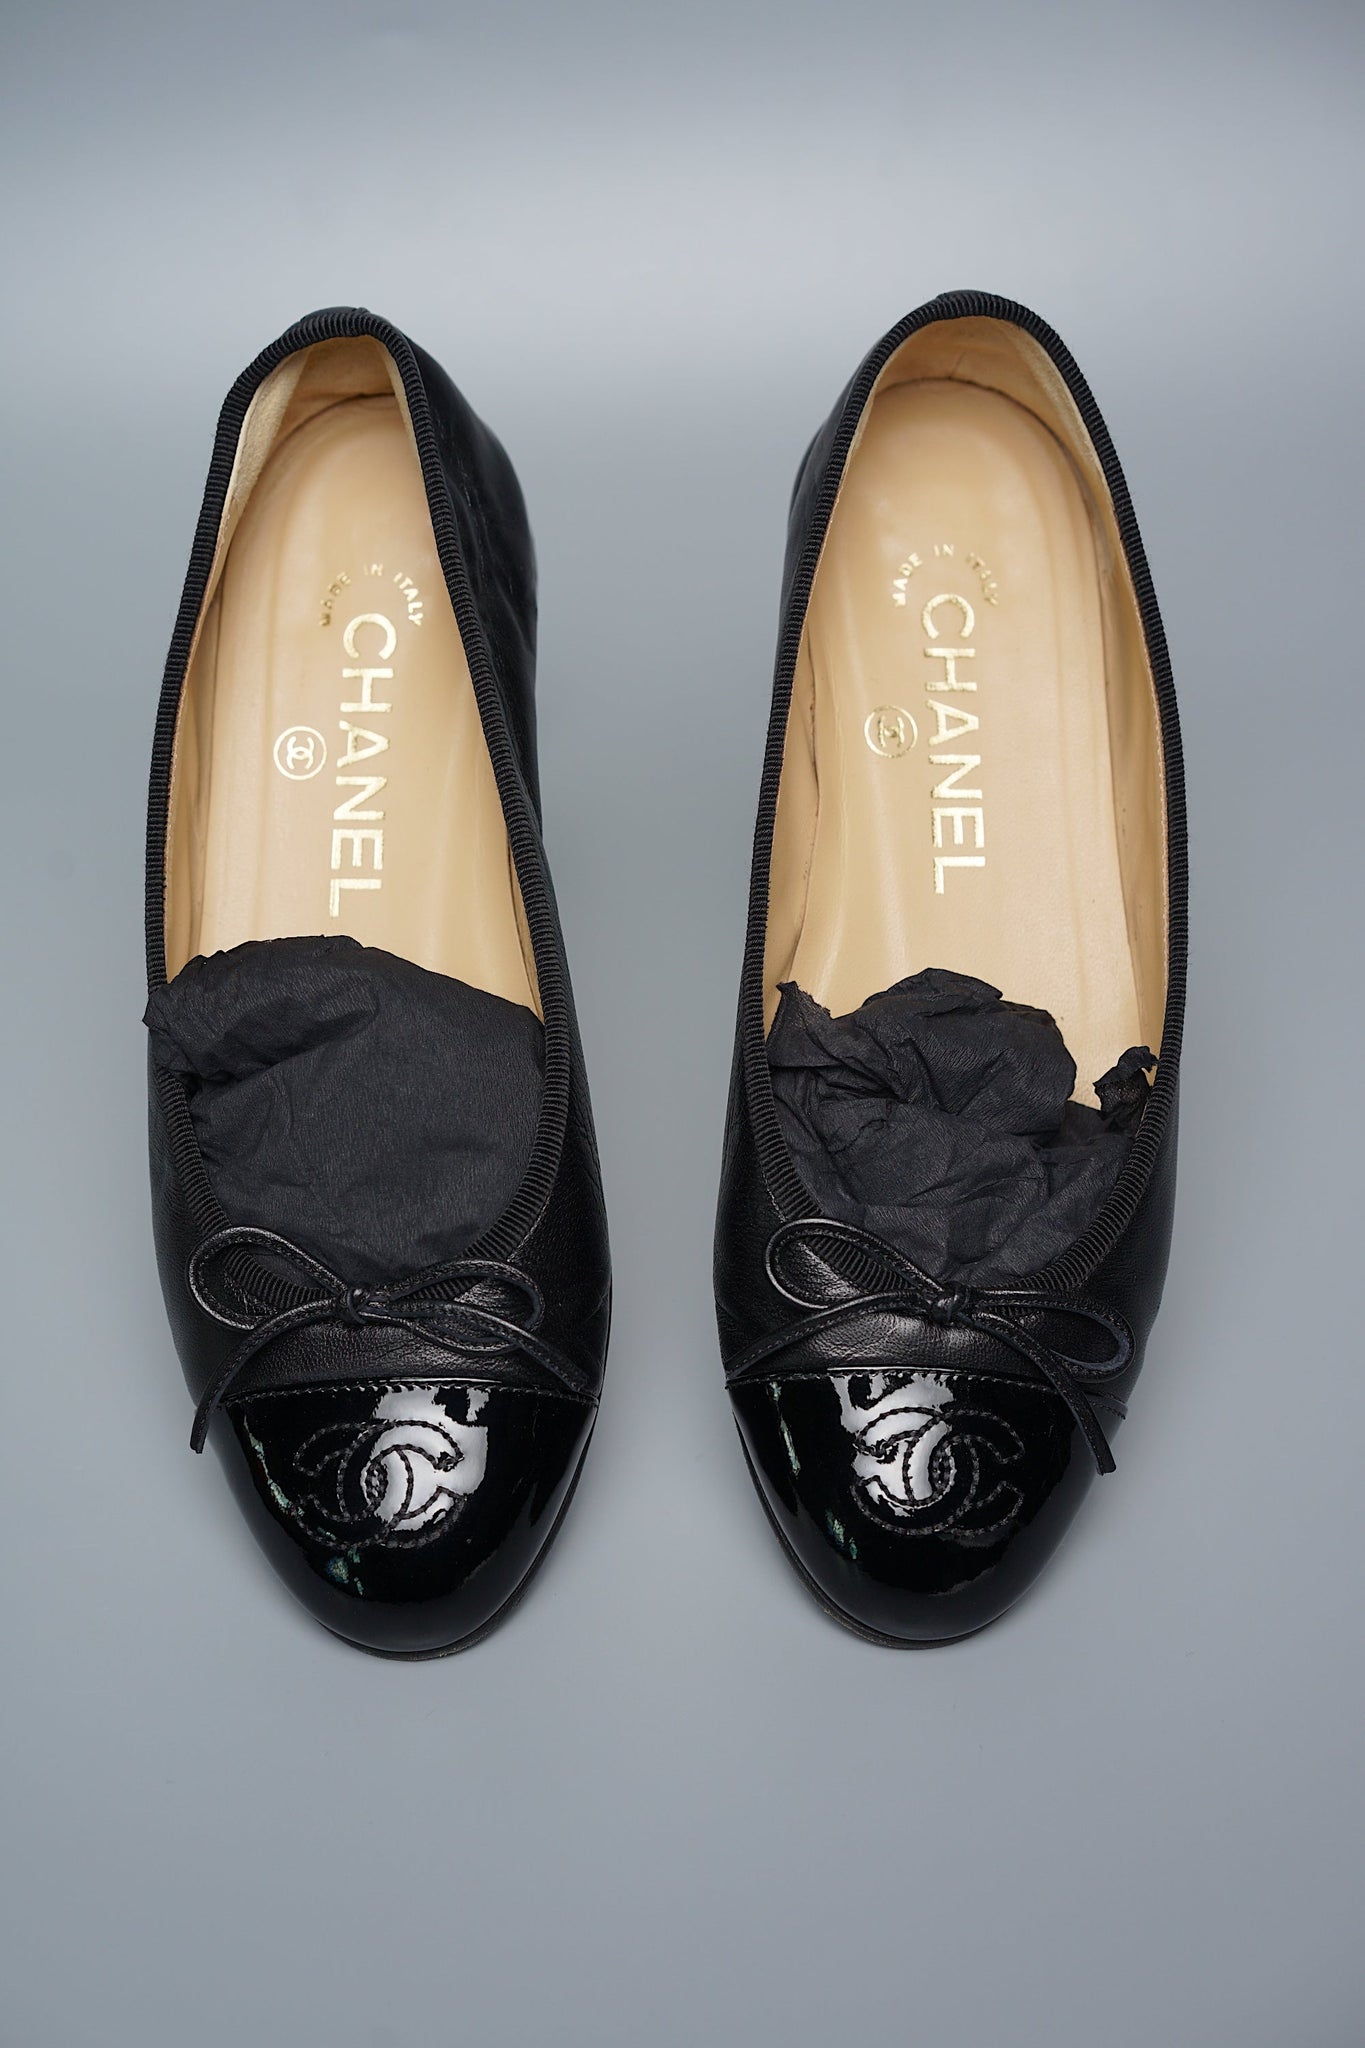 Chanel Pumps in Black Size 35